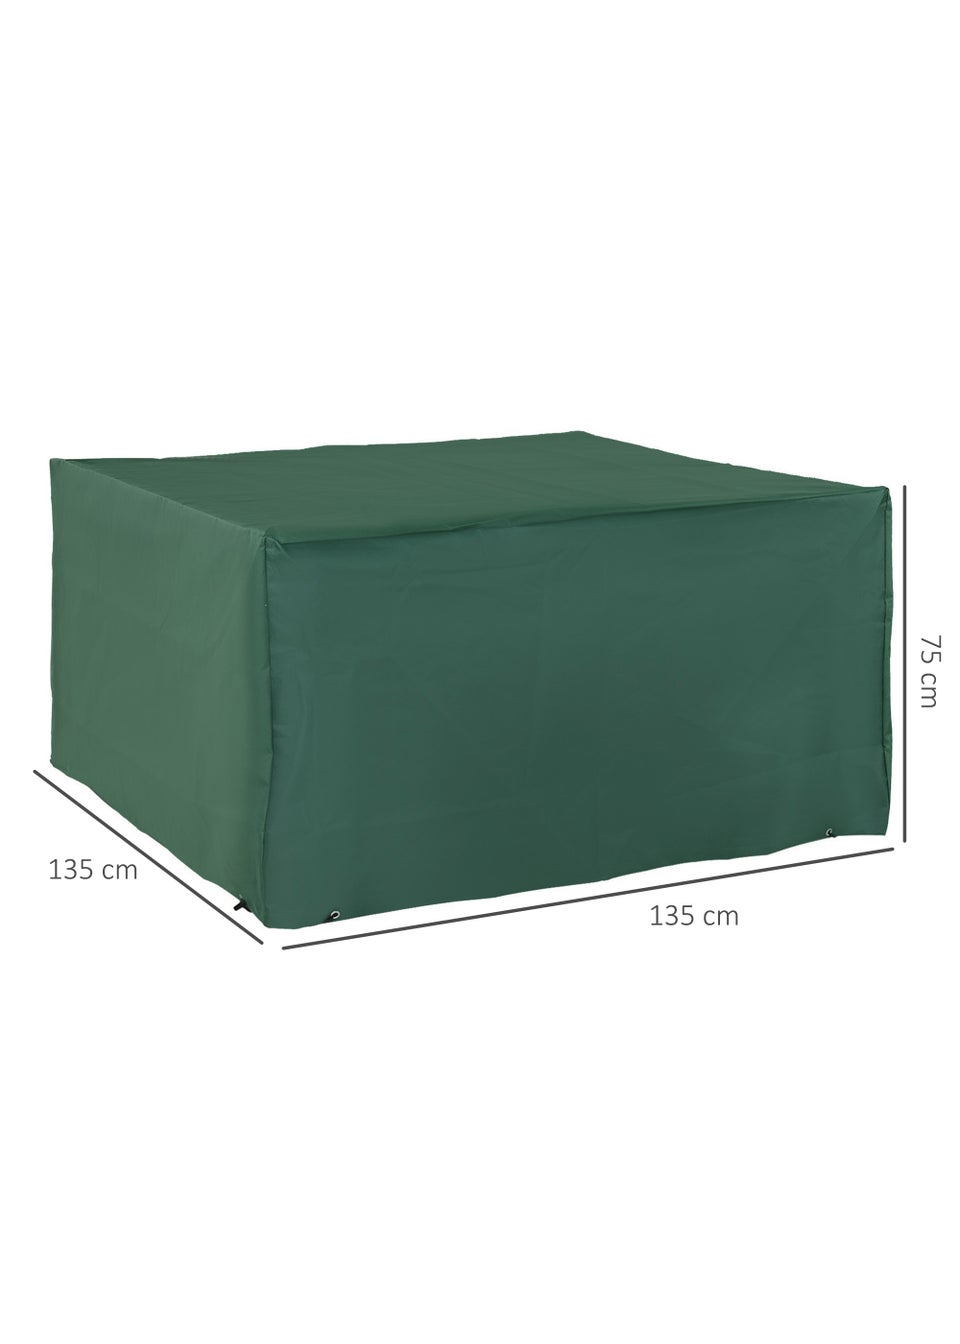 Outsunny Waterproof Outdoor Furniture Cover (135cm x 135cm x 75cm)